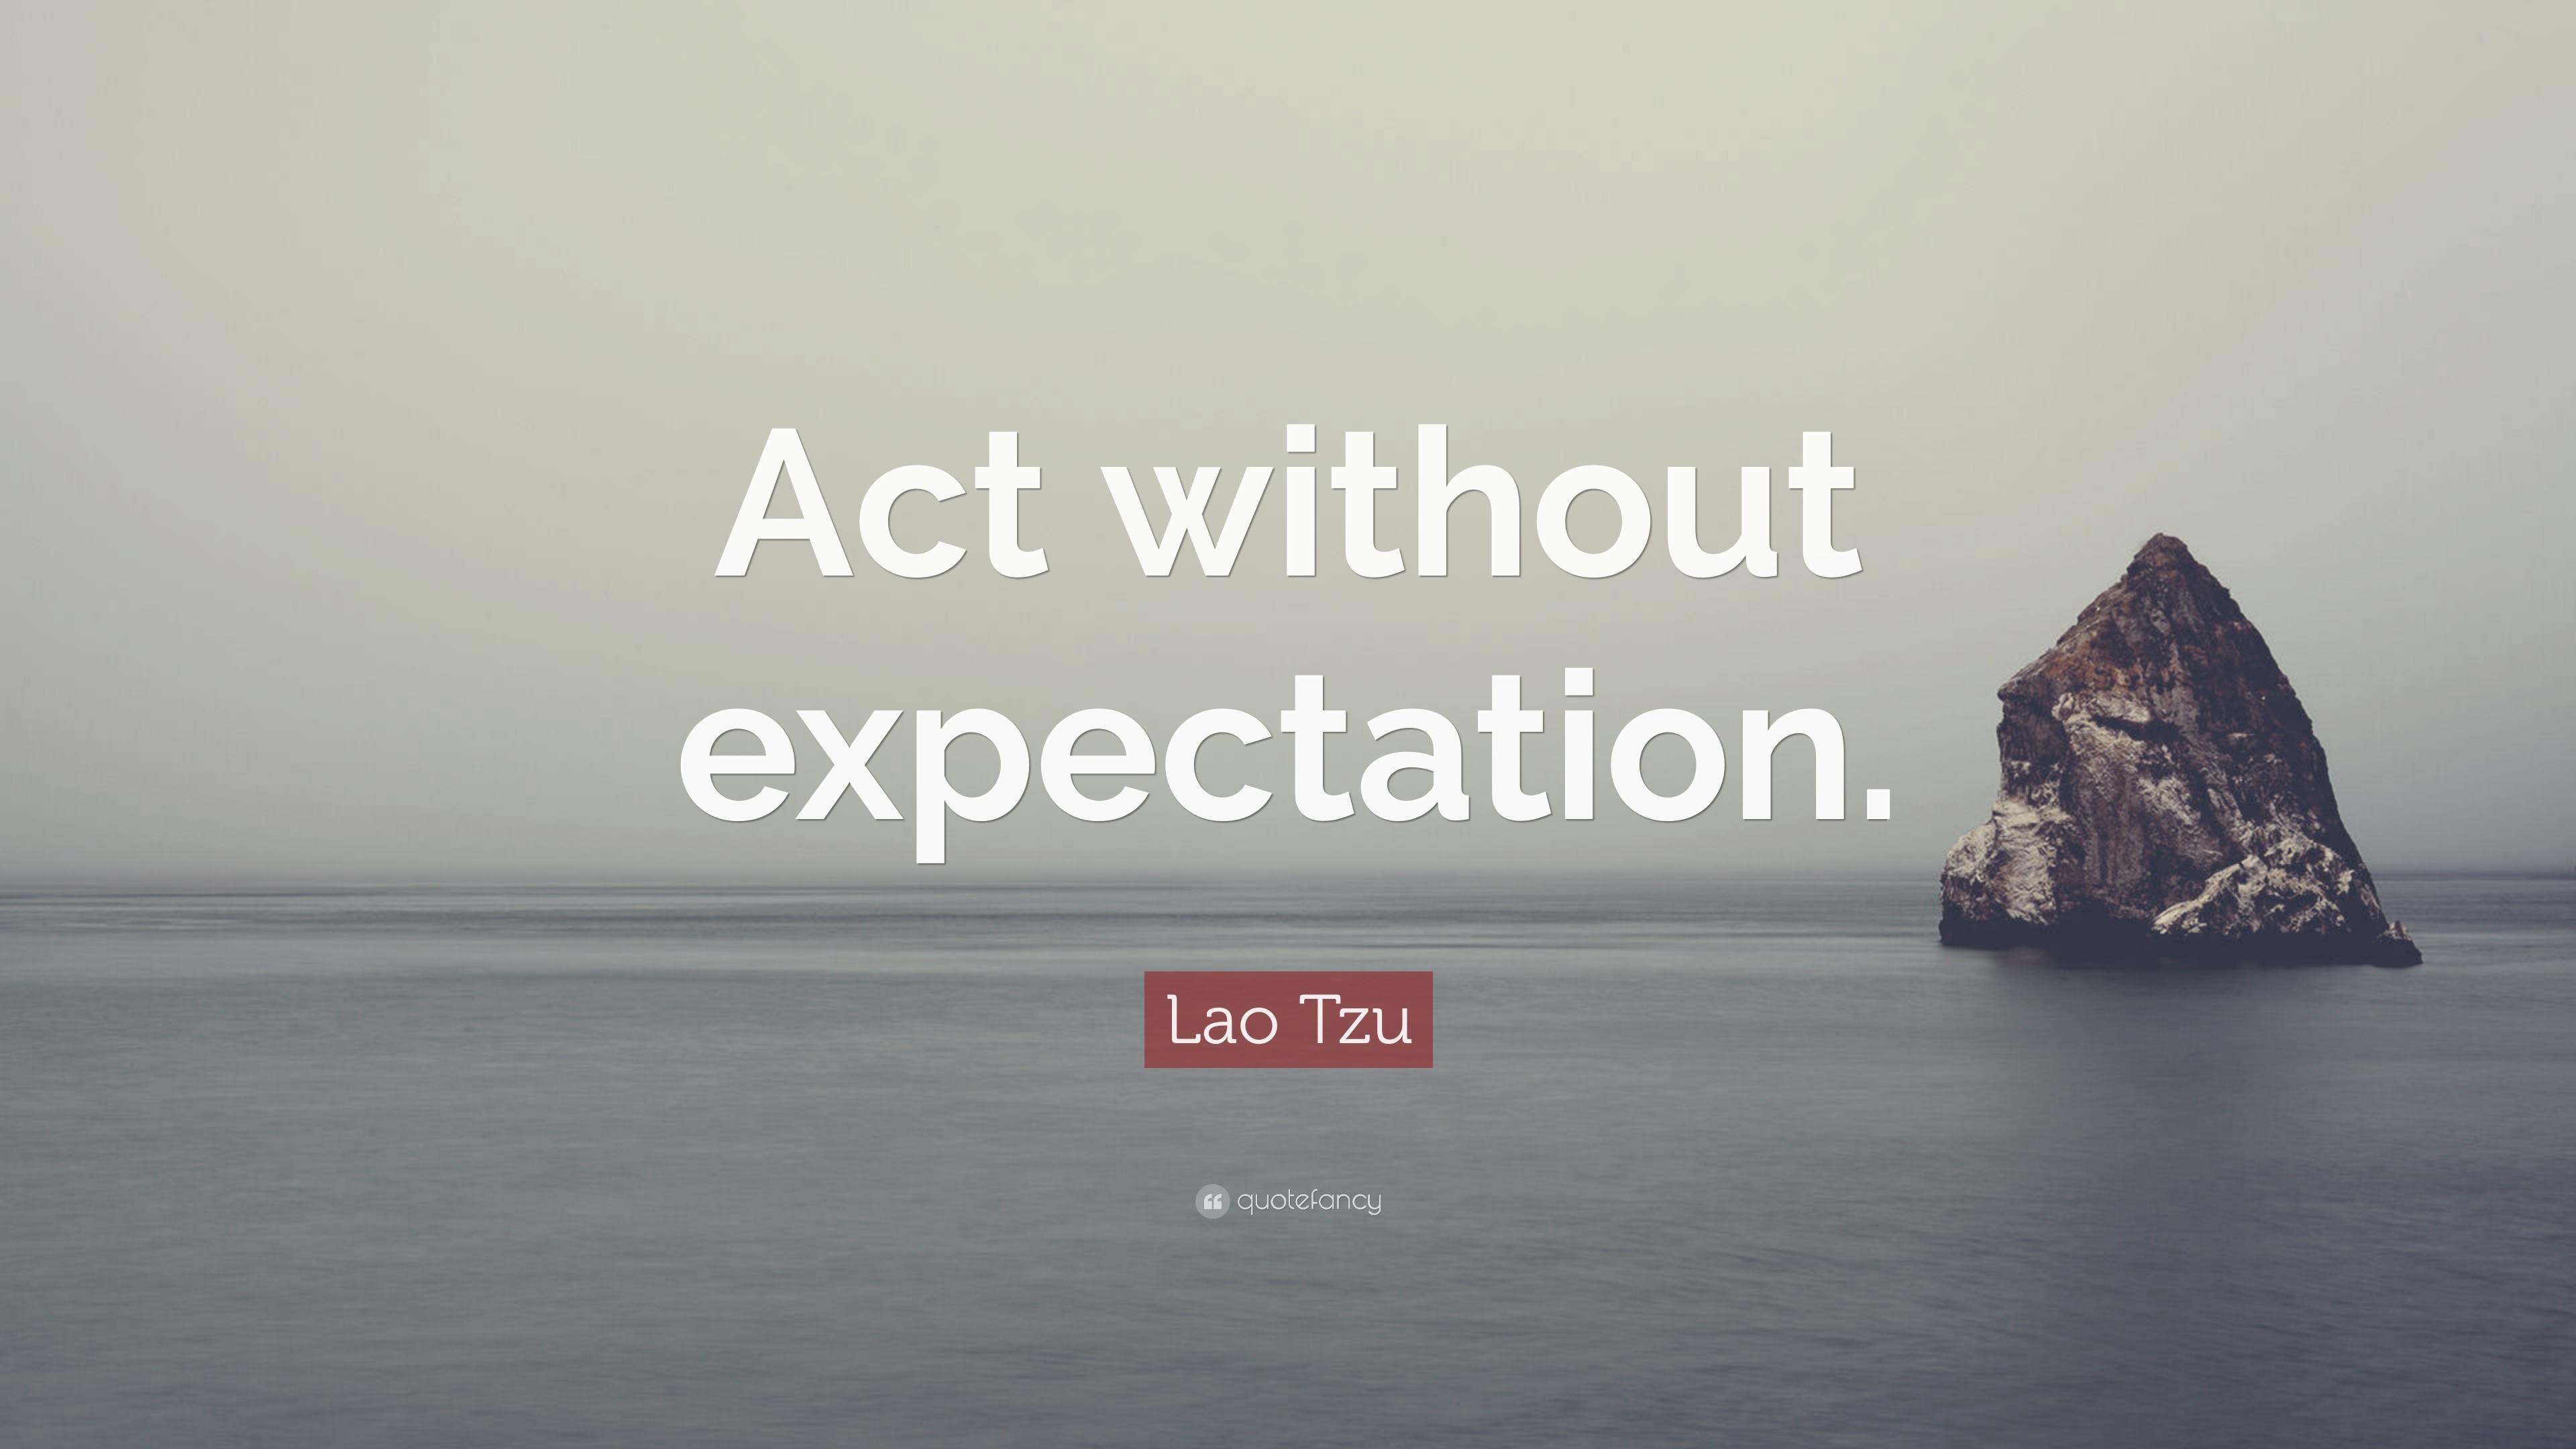 3840x2160 Lao Tzu Quote: "Act without expectation. 